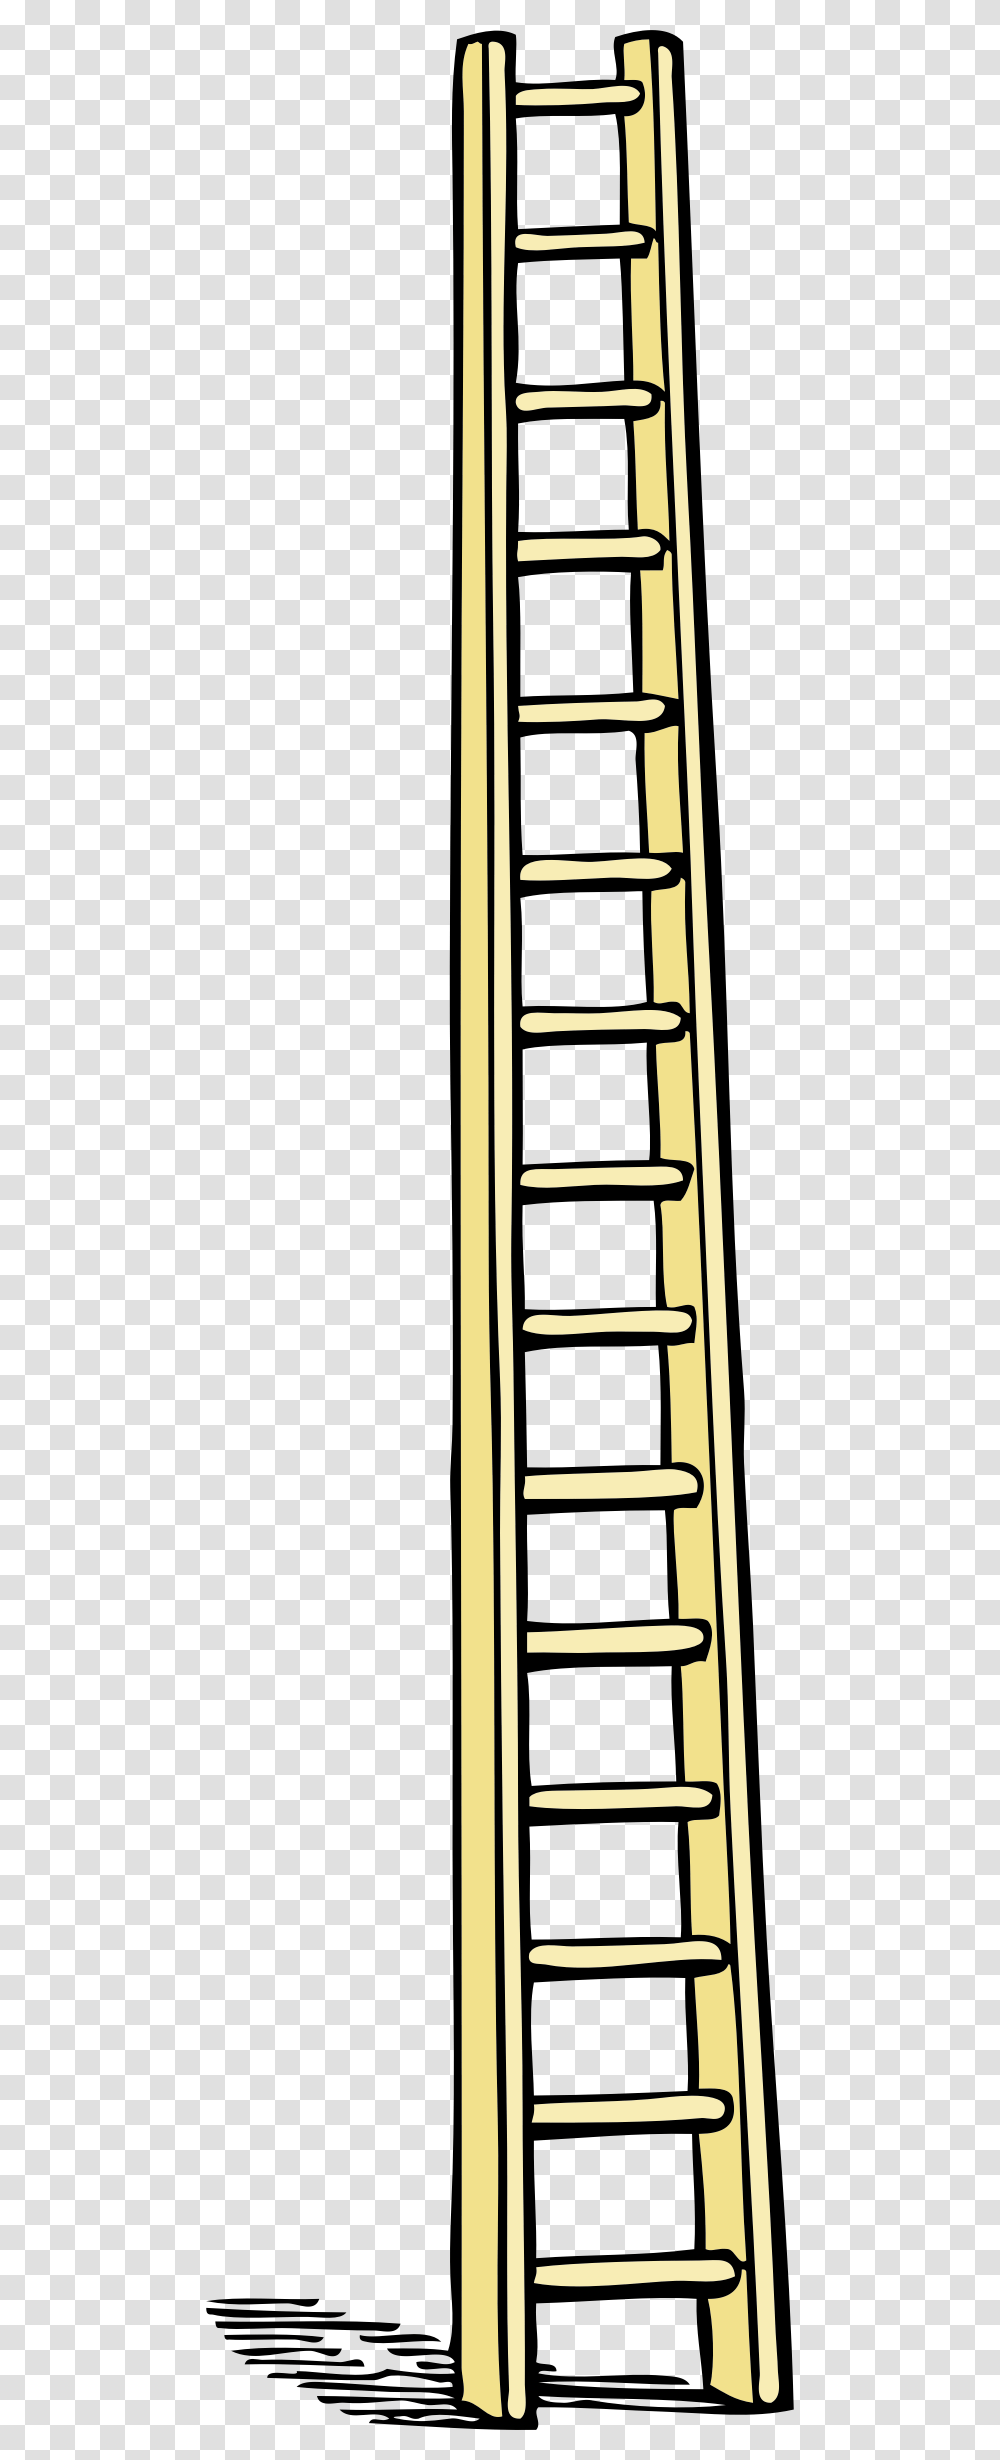 Tall Ladder Icons, Furniture, Chair, Cushion, Musical Instrument Transparent Png